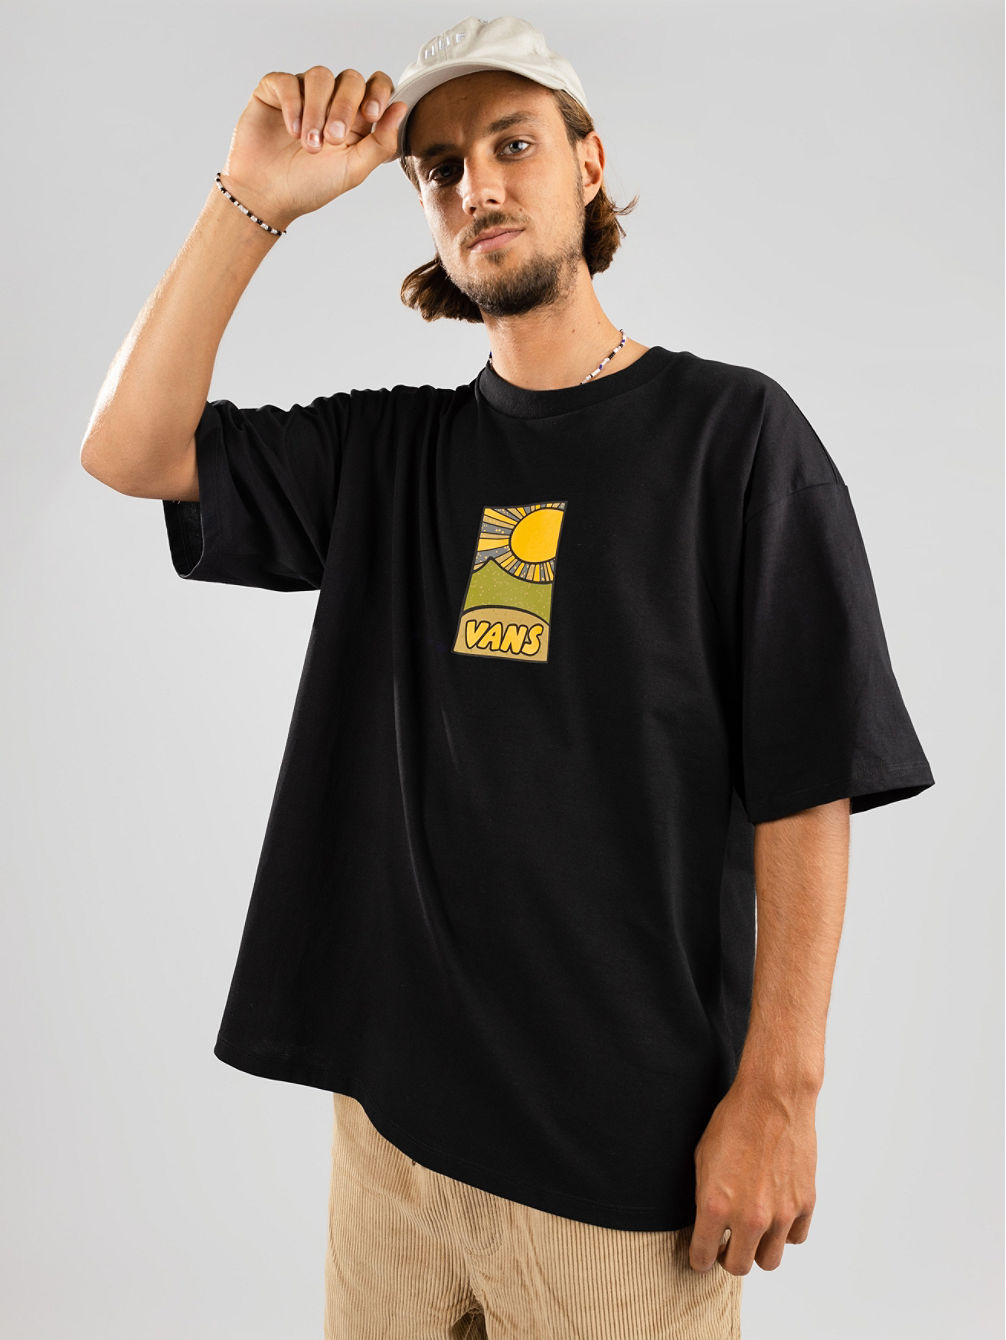 Off The Wall Skate Classic T-Shirt